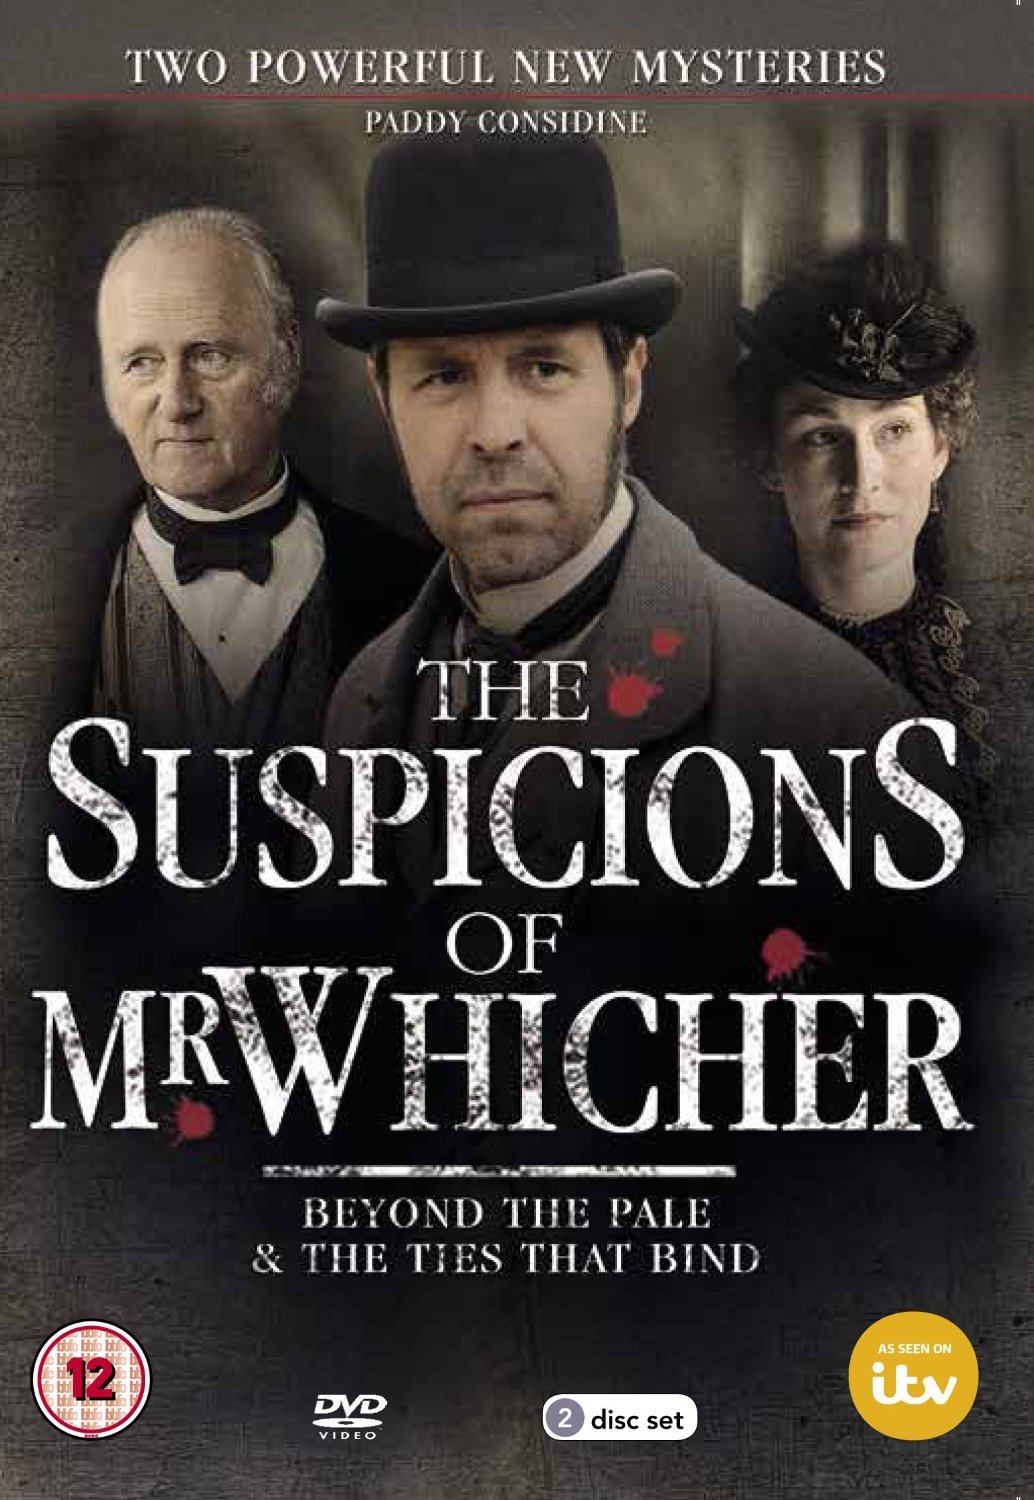 boom competitions - win a copy of The Suspicions of Mr Whicher on DVD